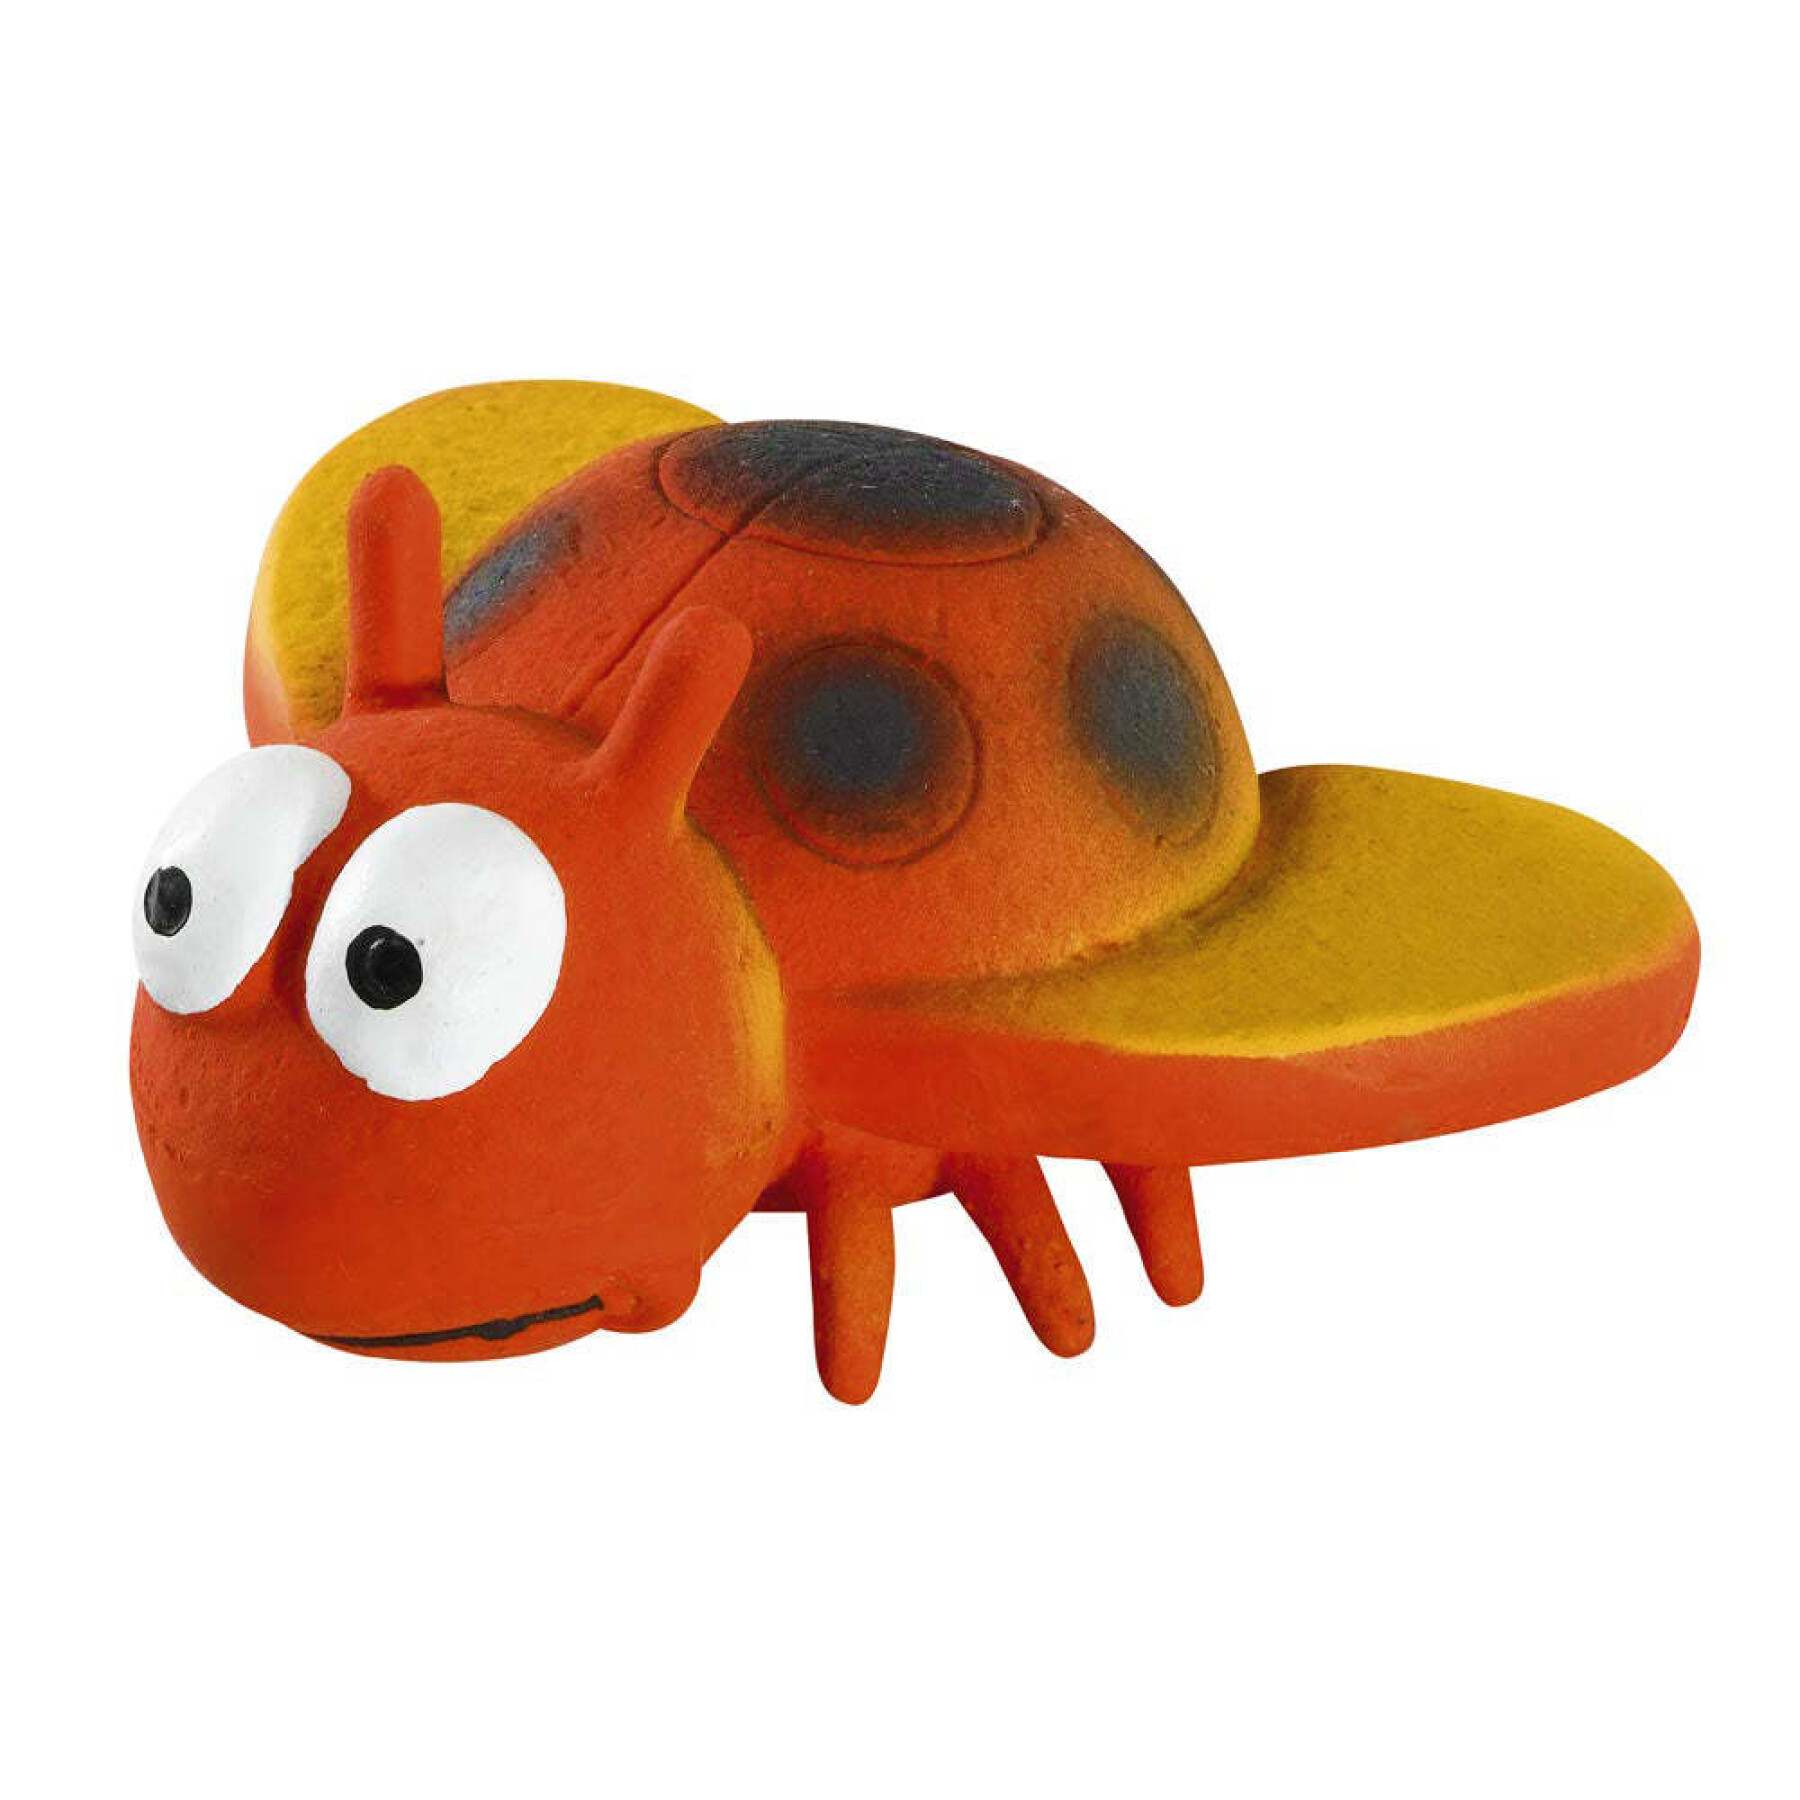 Dog toy insects Ferplast PA 5546